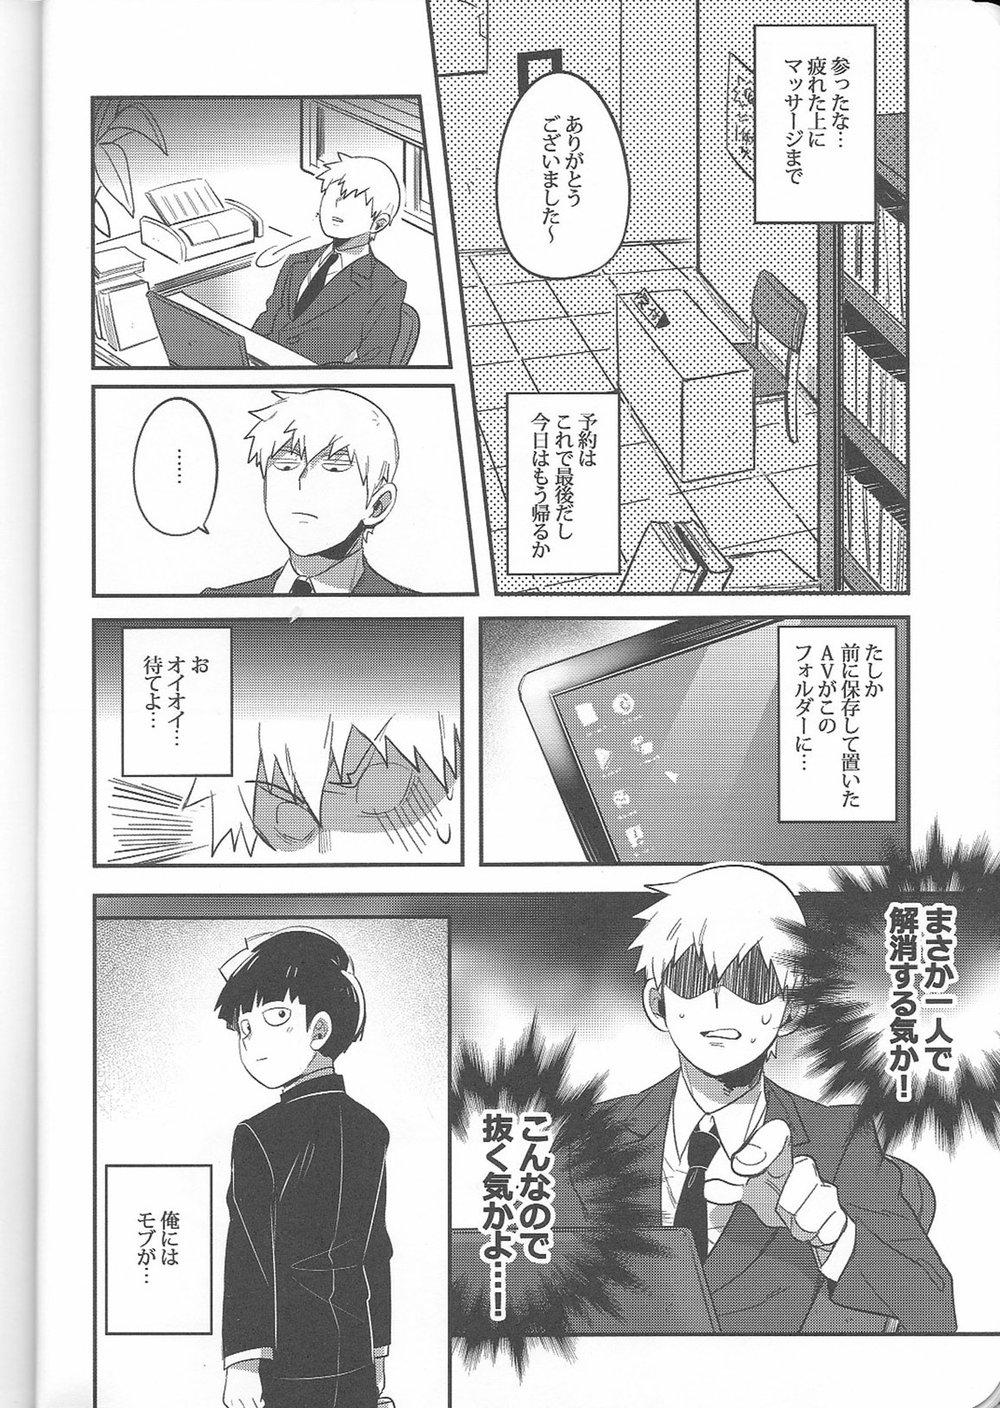 Toys Torisetsu - Mob psycho 100 Real Couple - Page 11